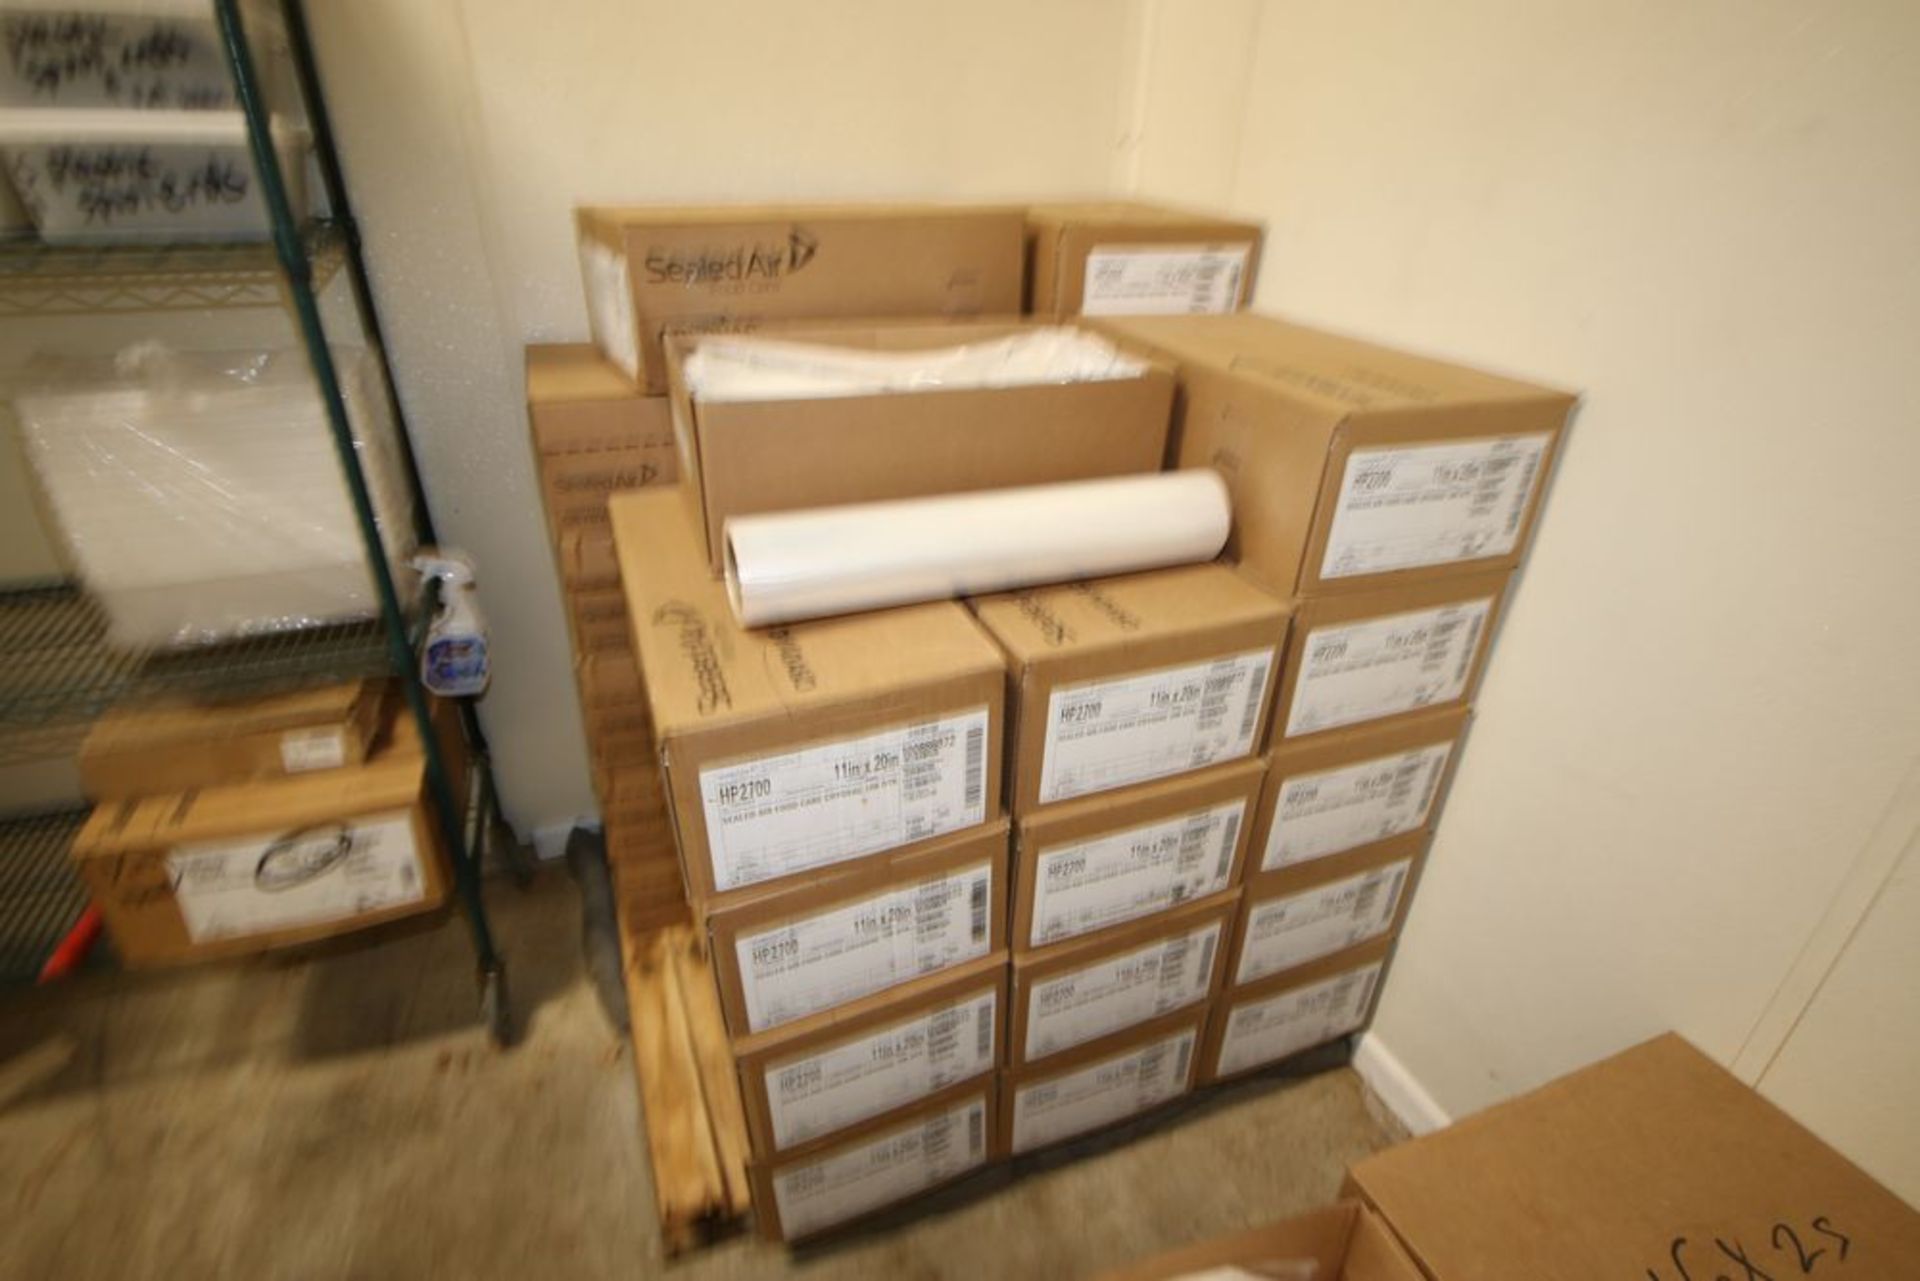 Contents of Back Storage Area, Includes (2) Pallets of Seal Aire Plastic Rolls for Cryovac, with (2) - Image 5 of 6